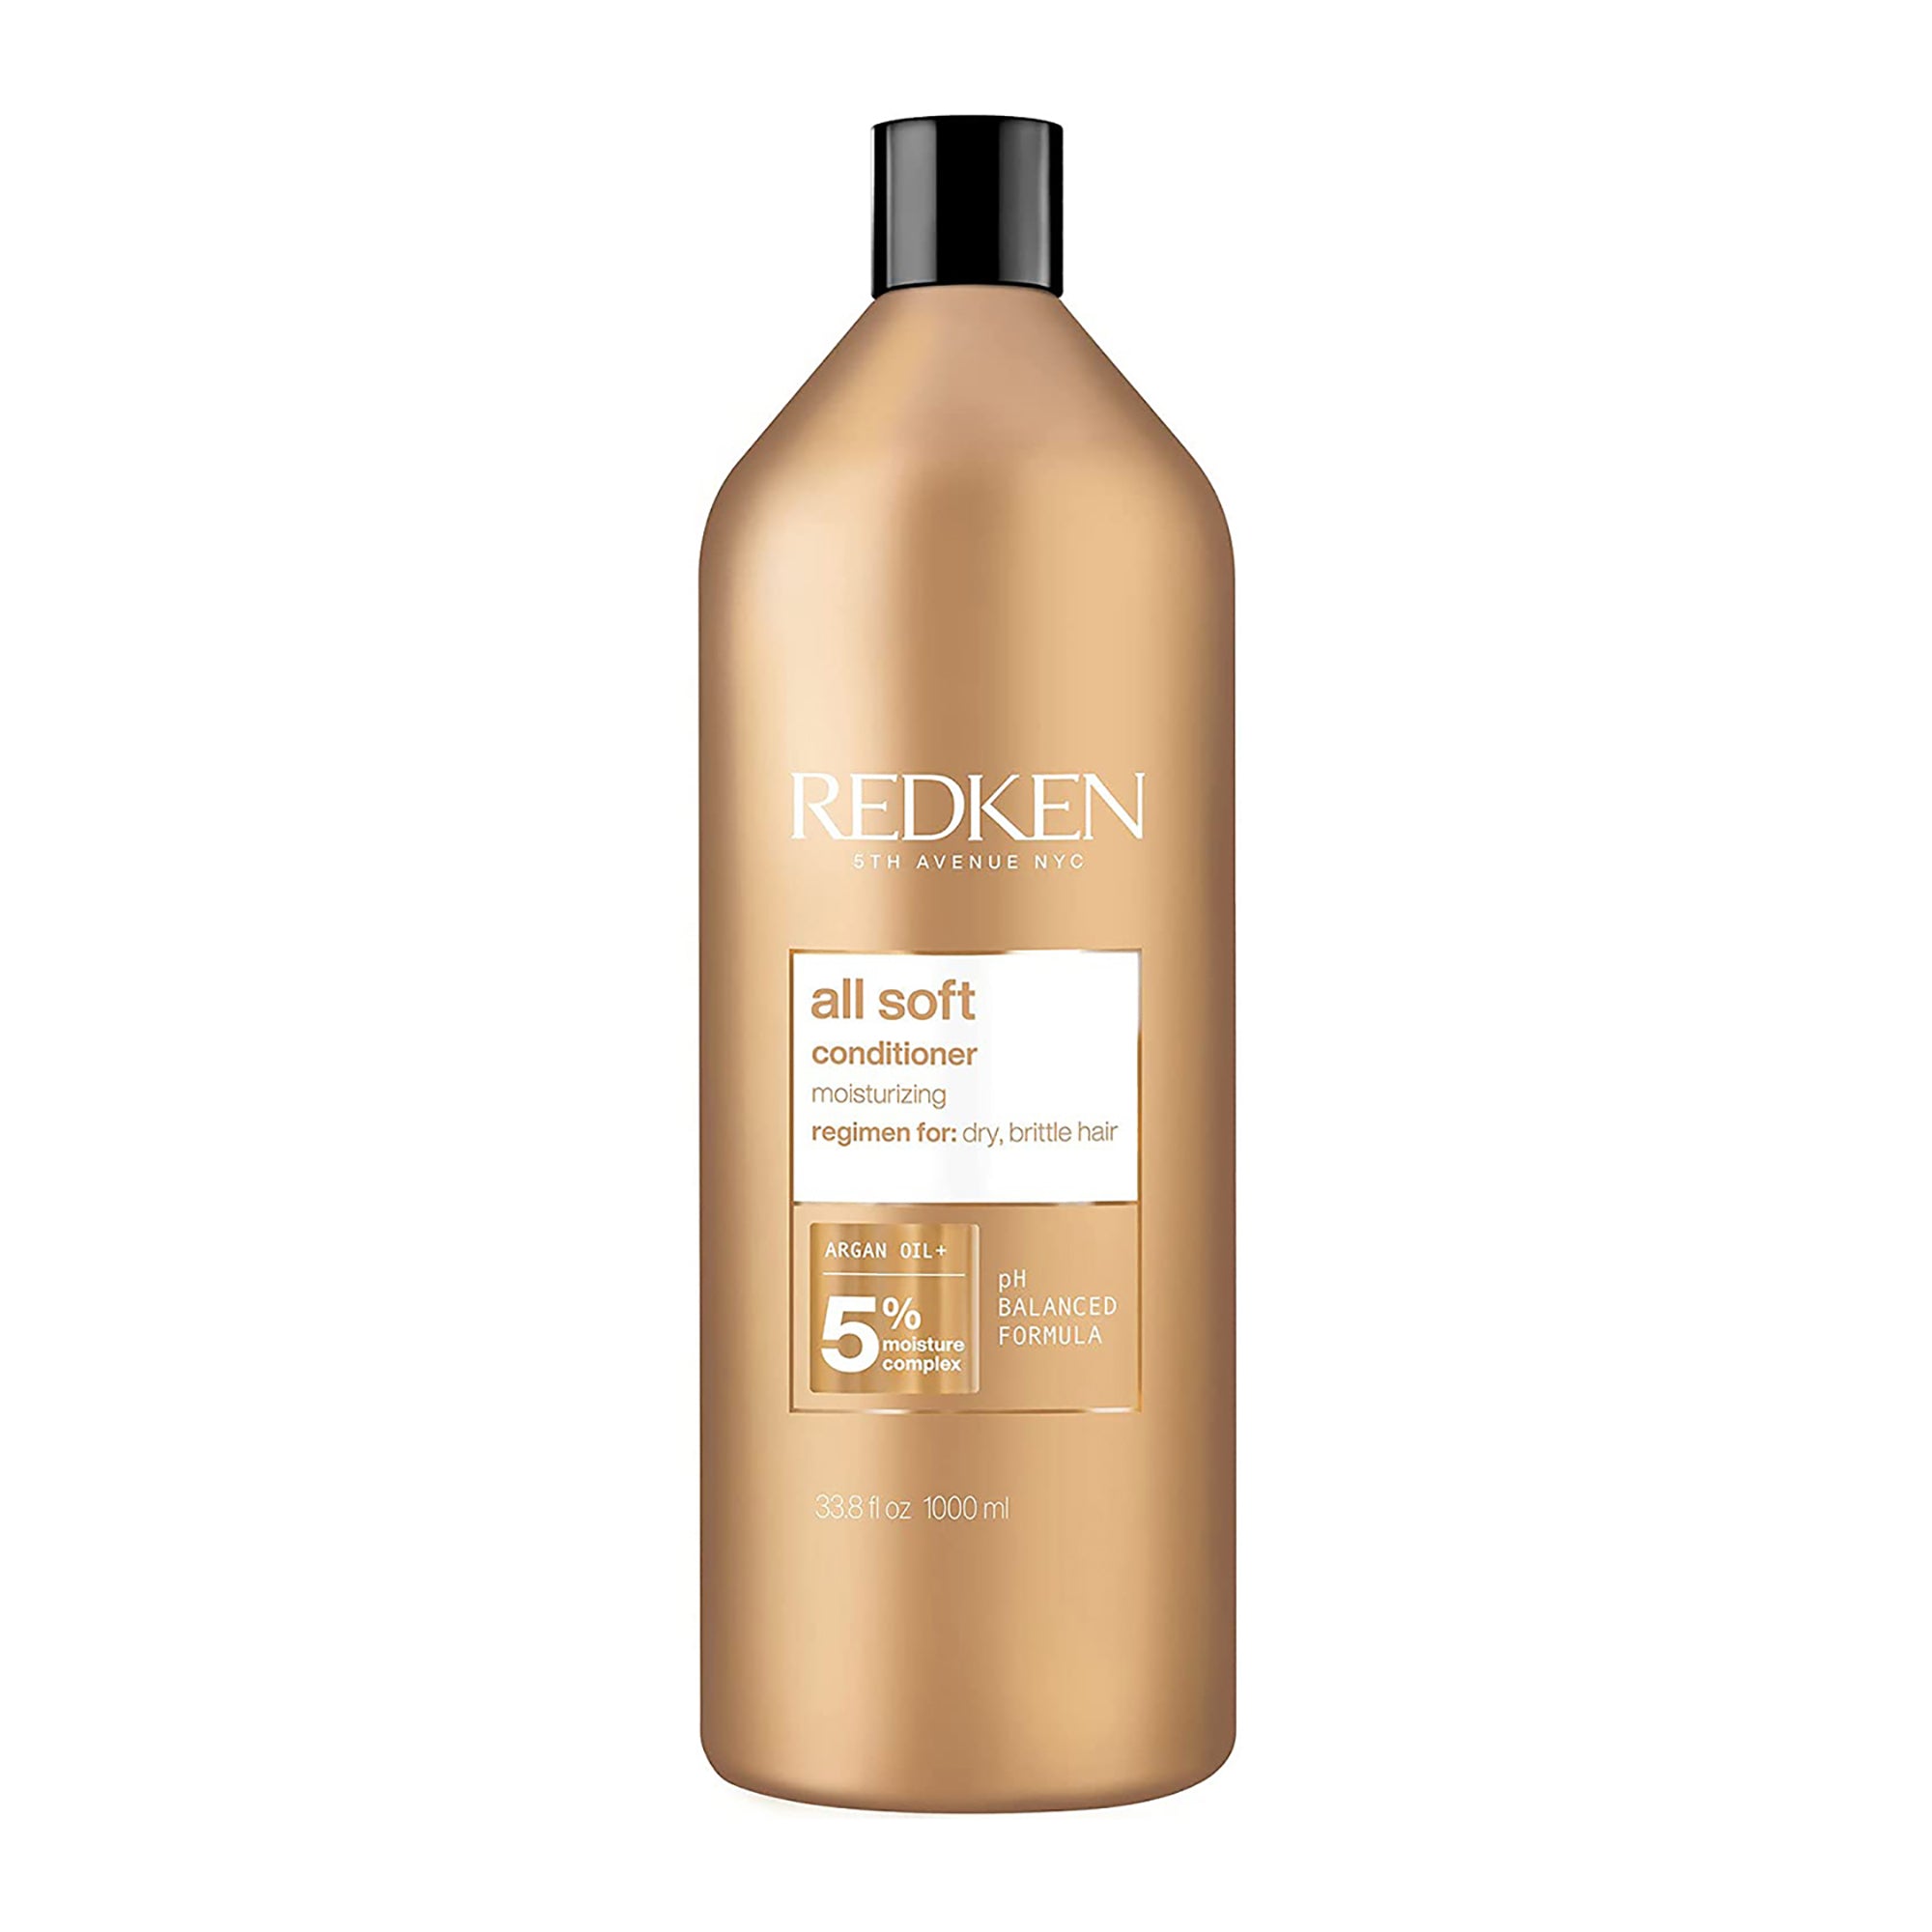 Redken All Soft Shampoo and Conditioner Liter ($100 Value) / DUO